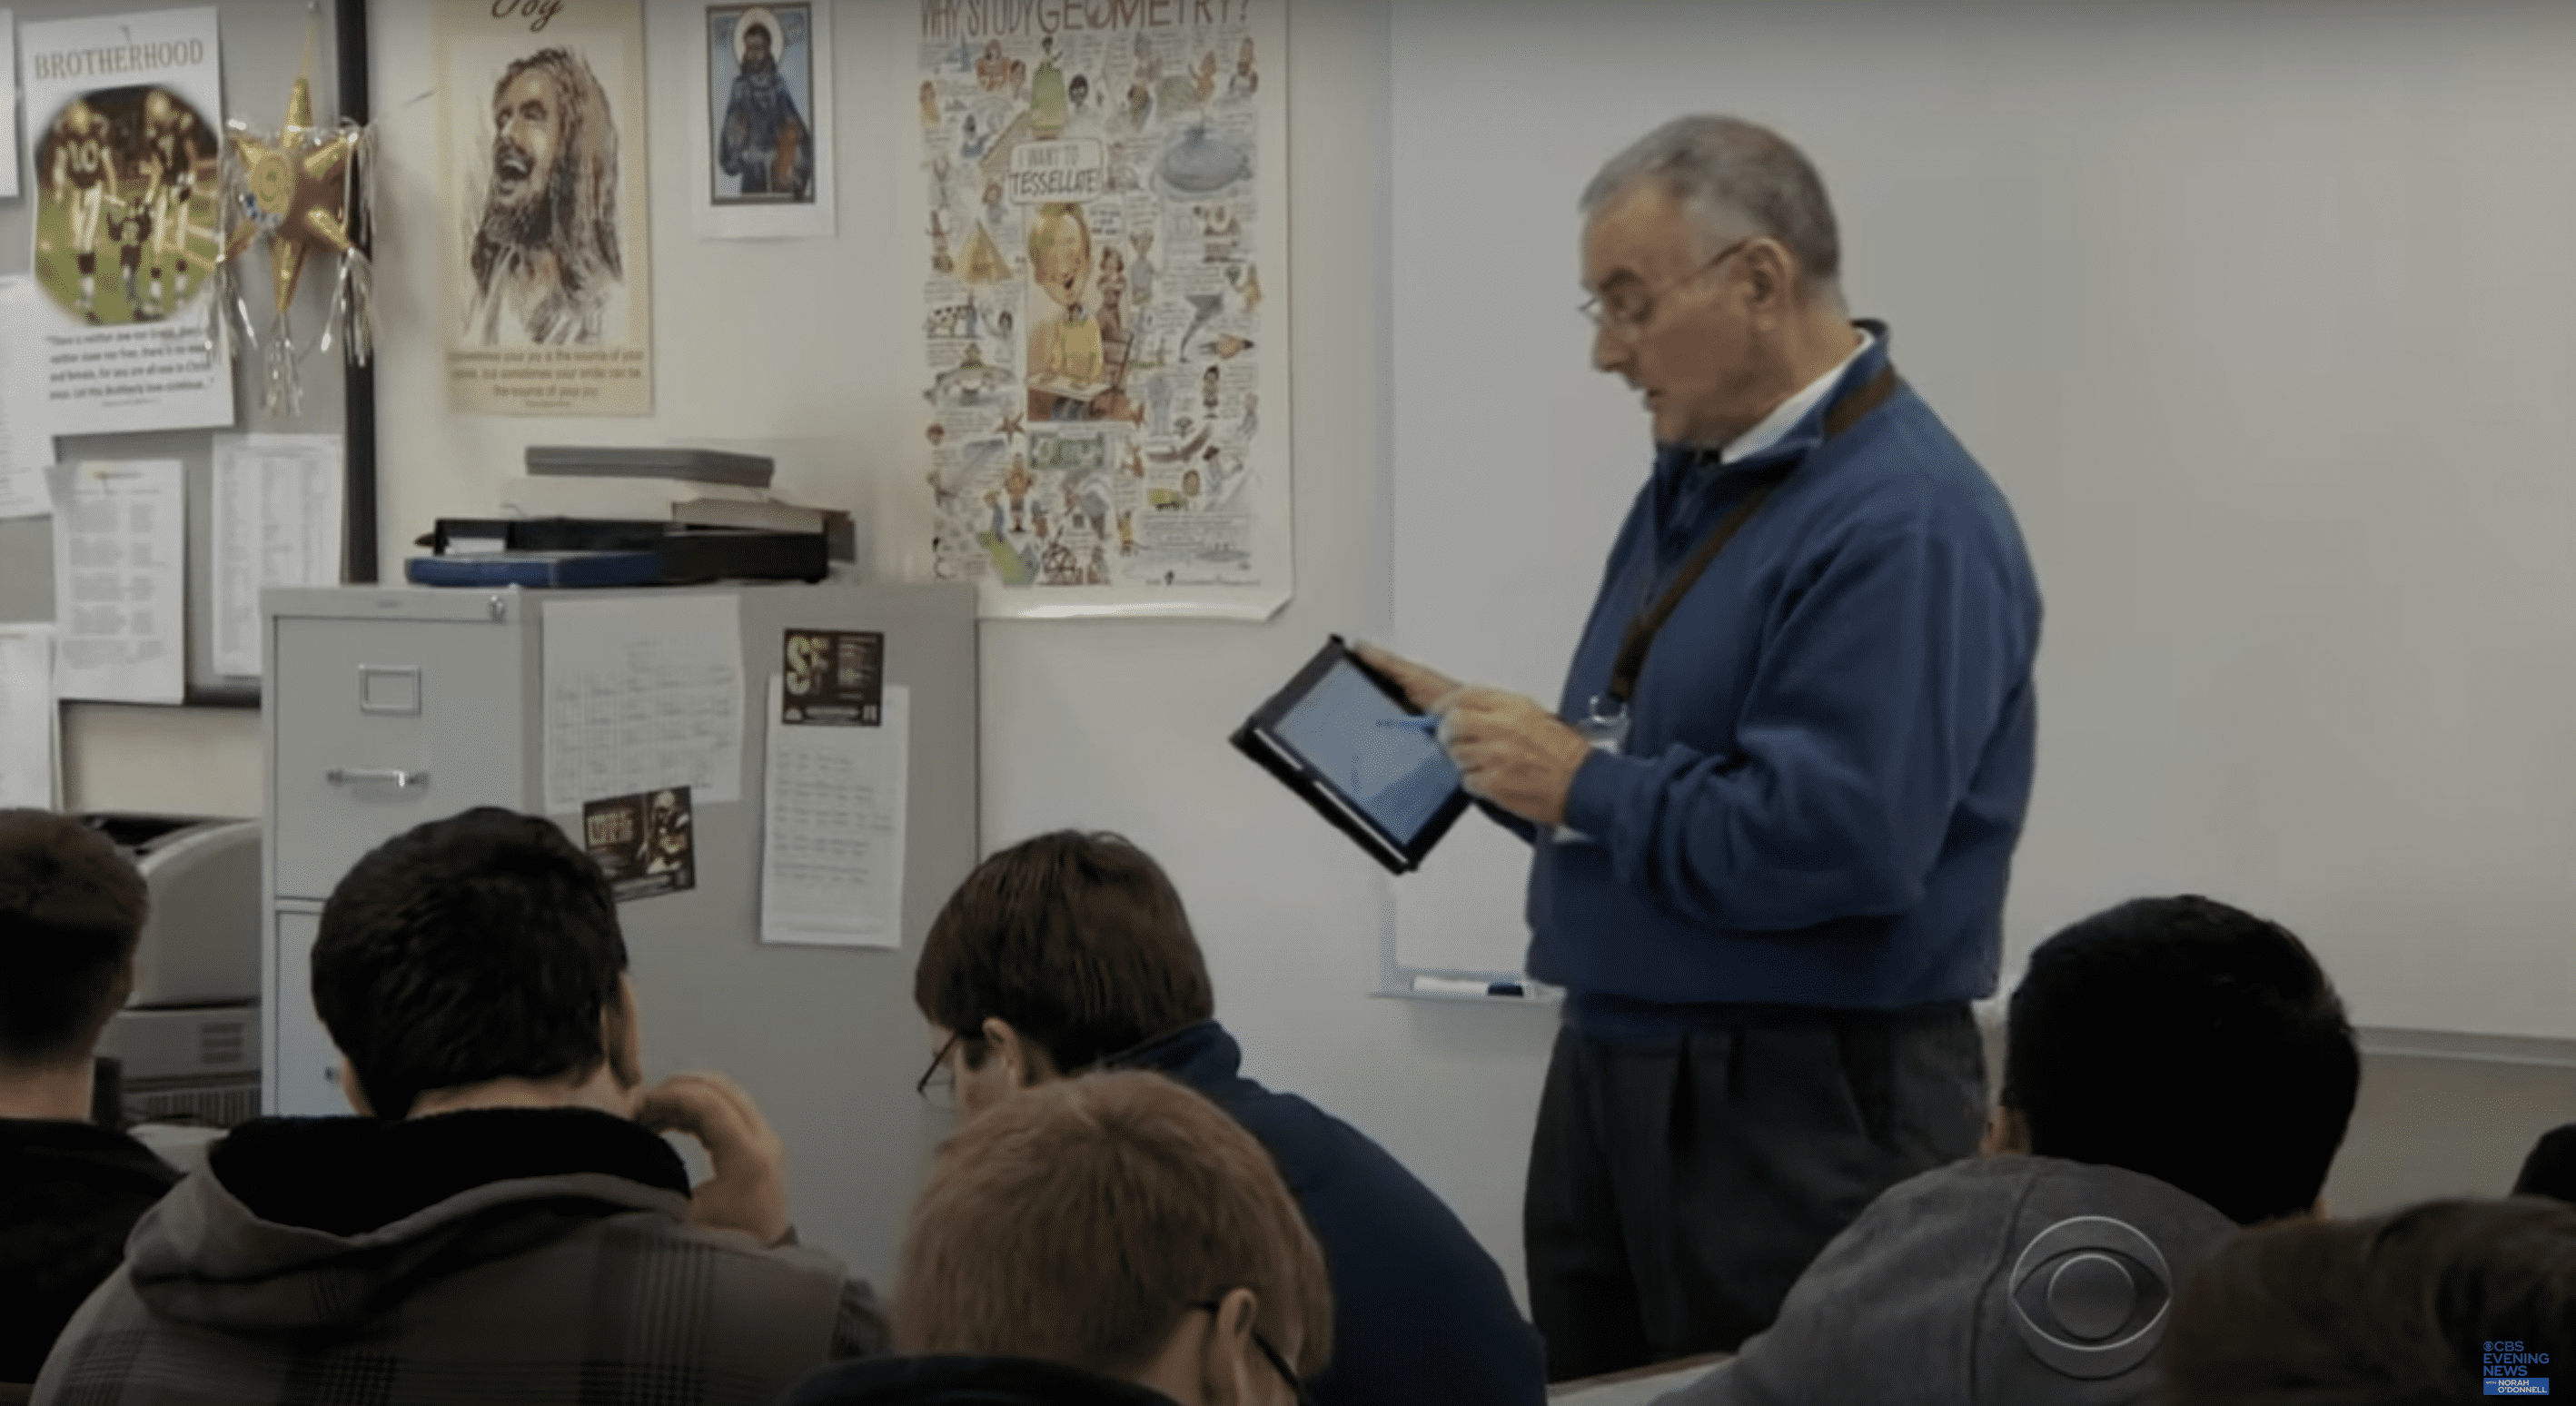 Jim O'Connor pictured while teaching his class. | Source: youtube.com/CBS Evening News